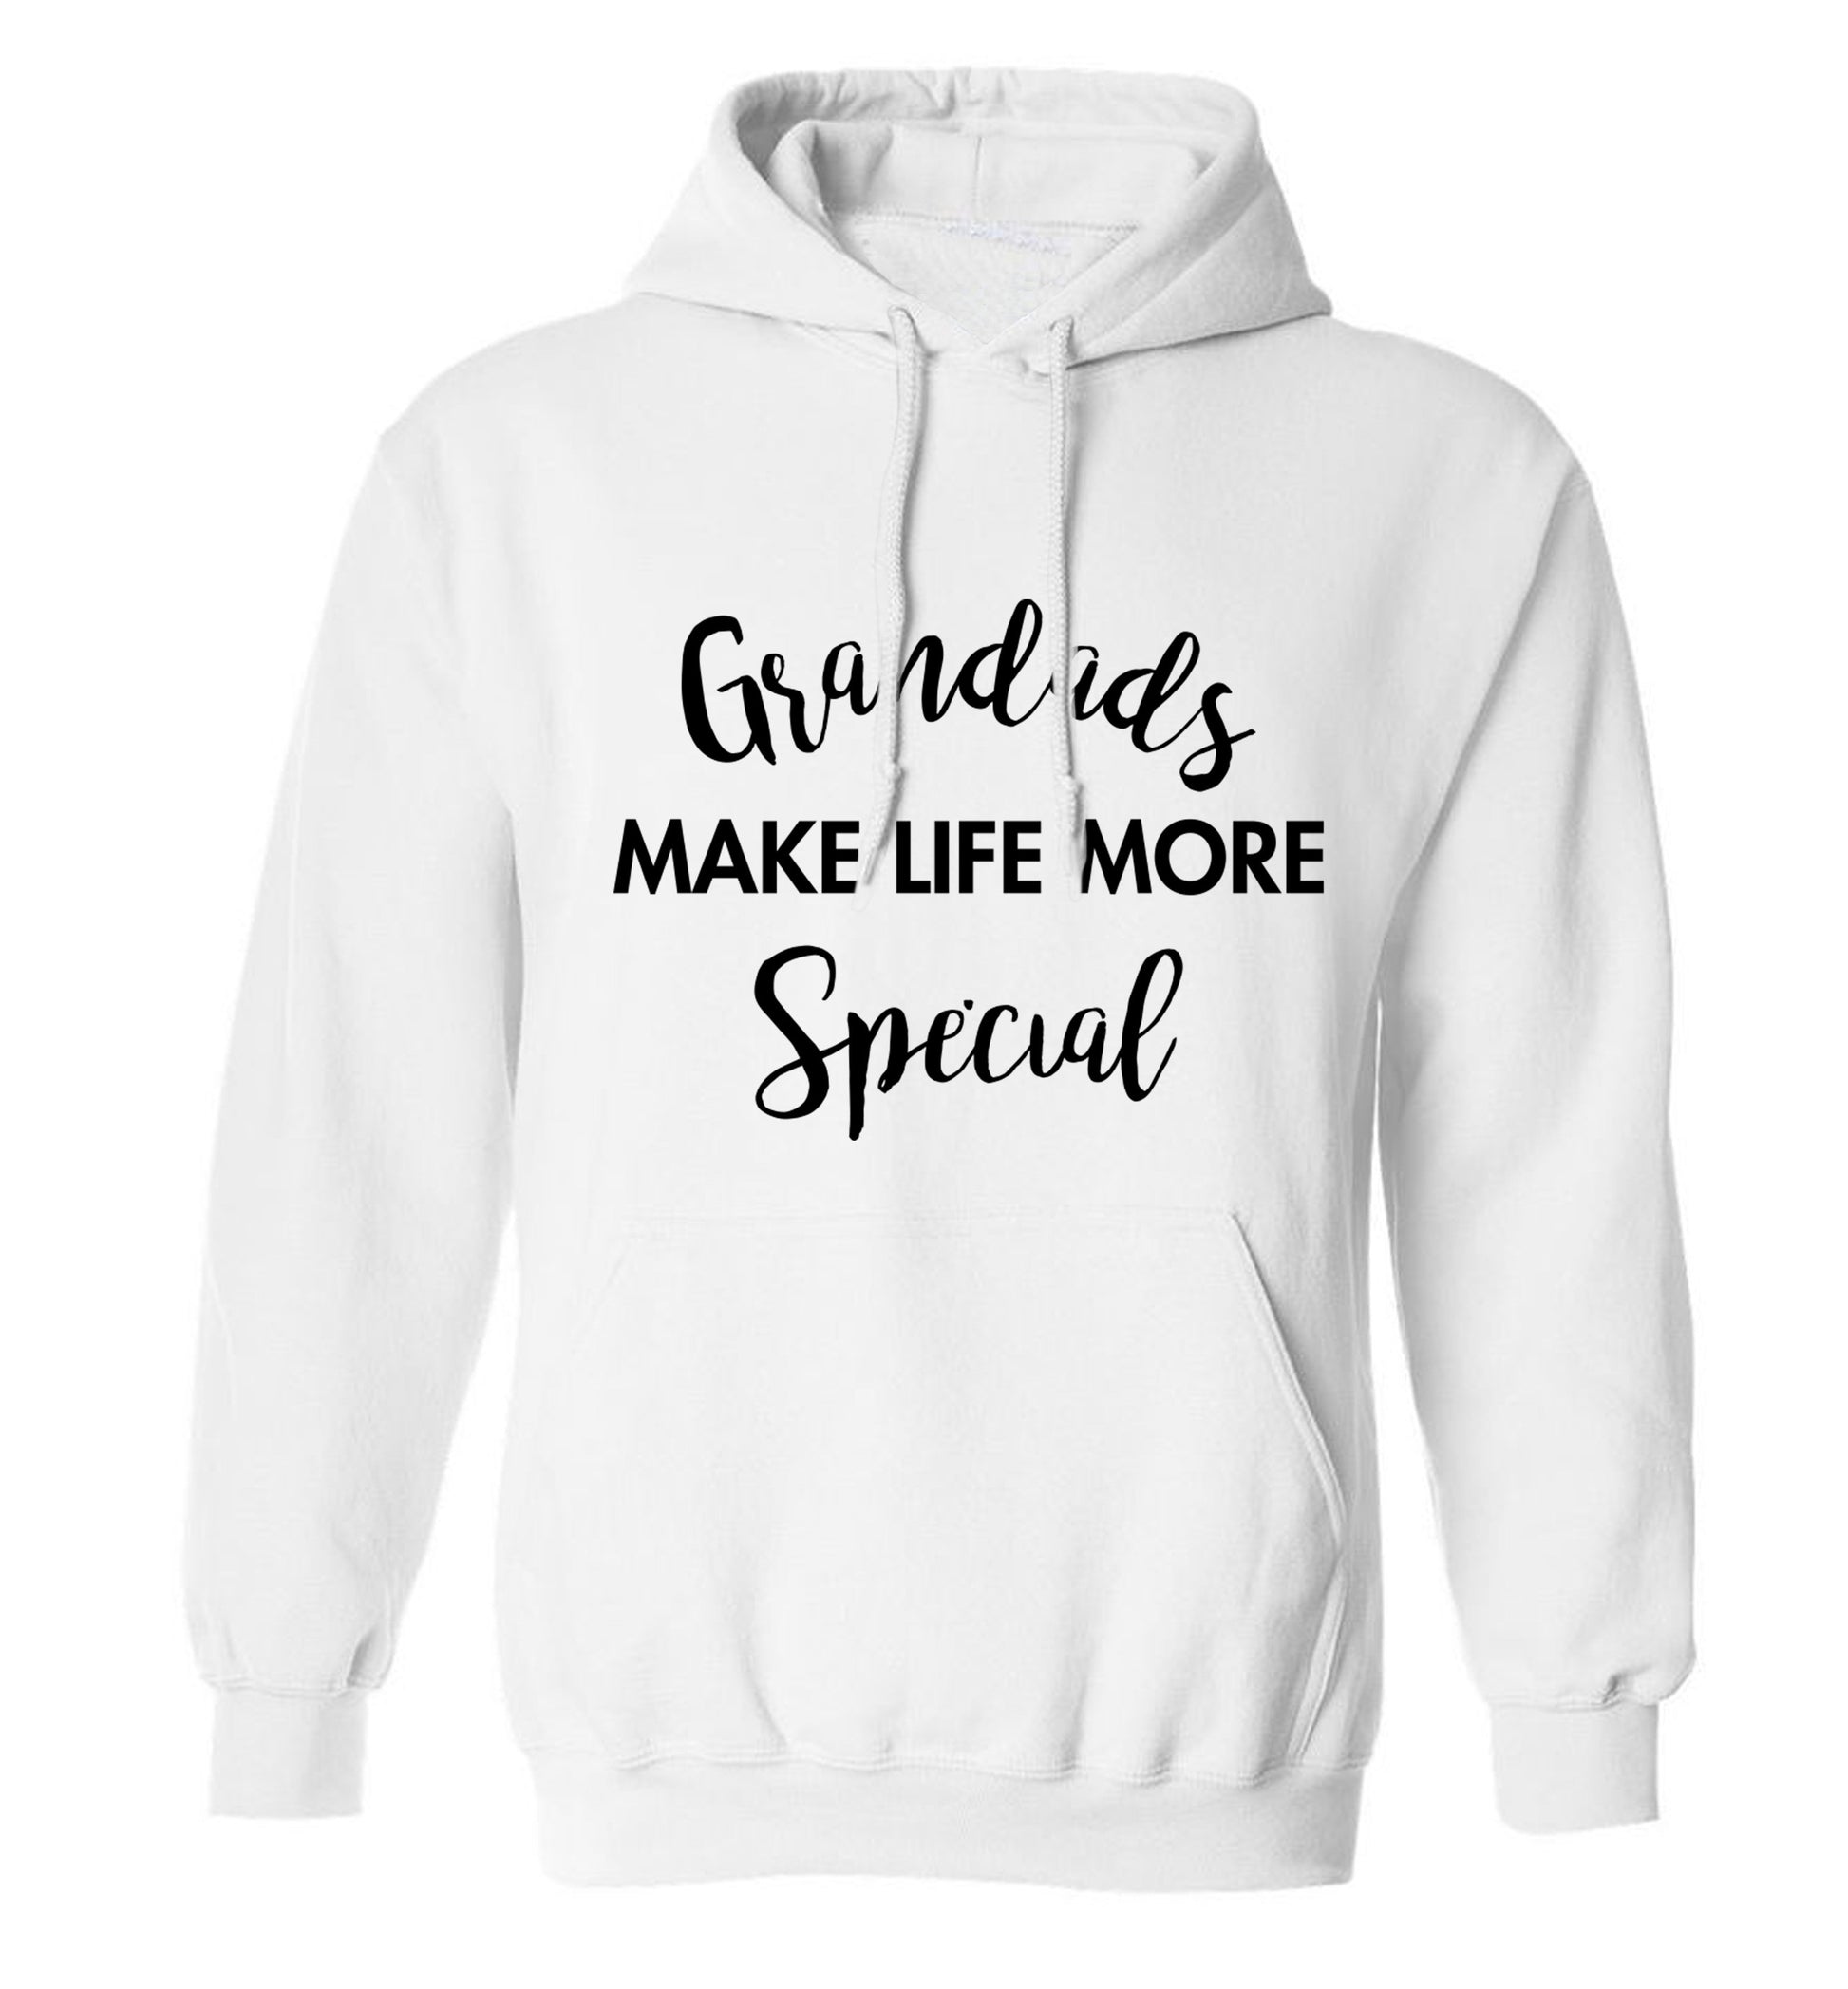 Grandads make life more special adults unisex white hoodie 2XL